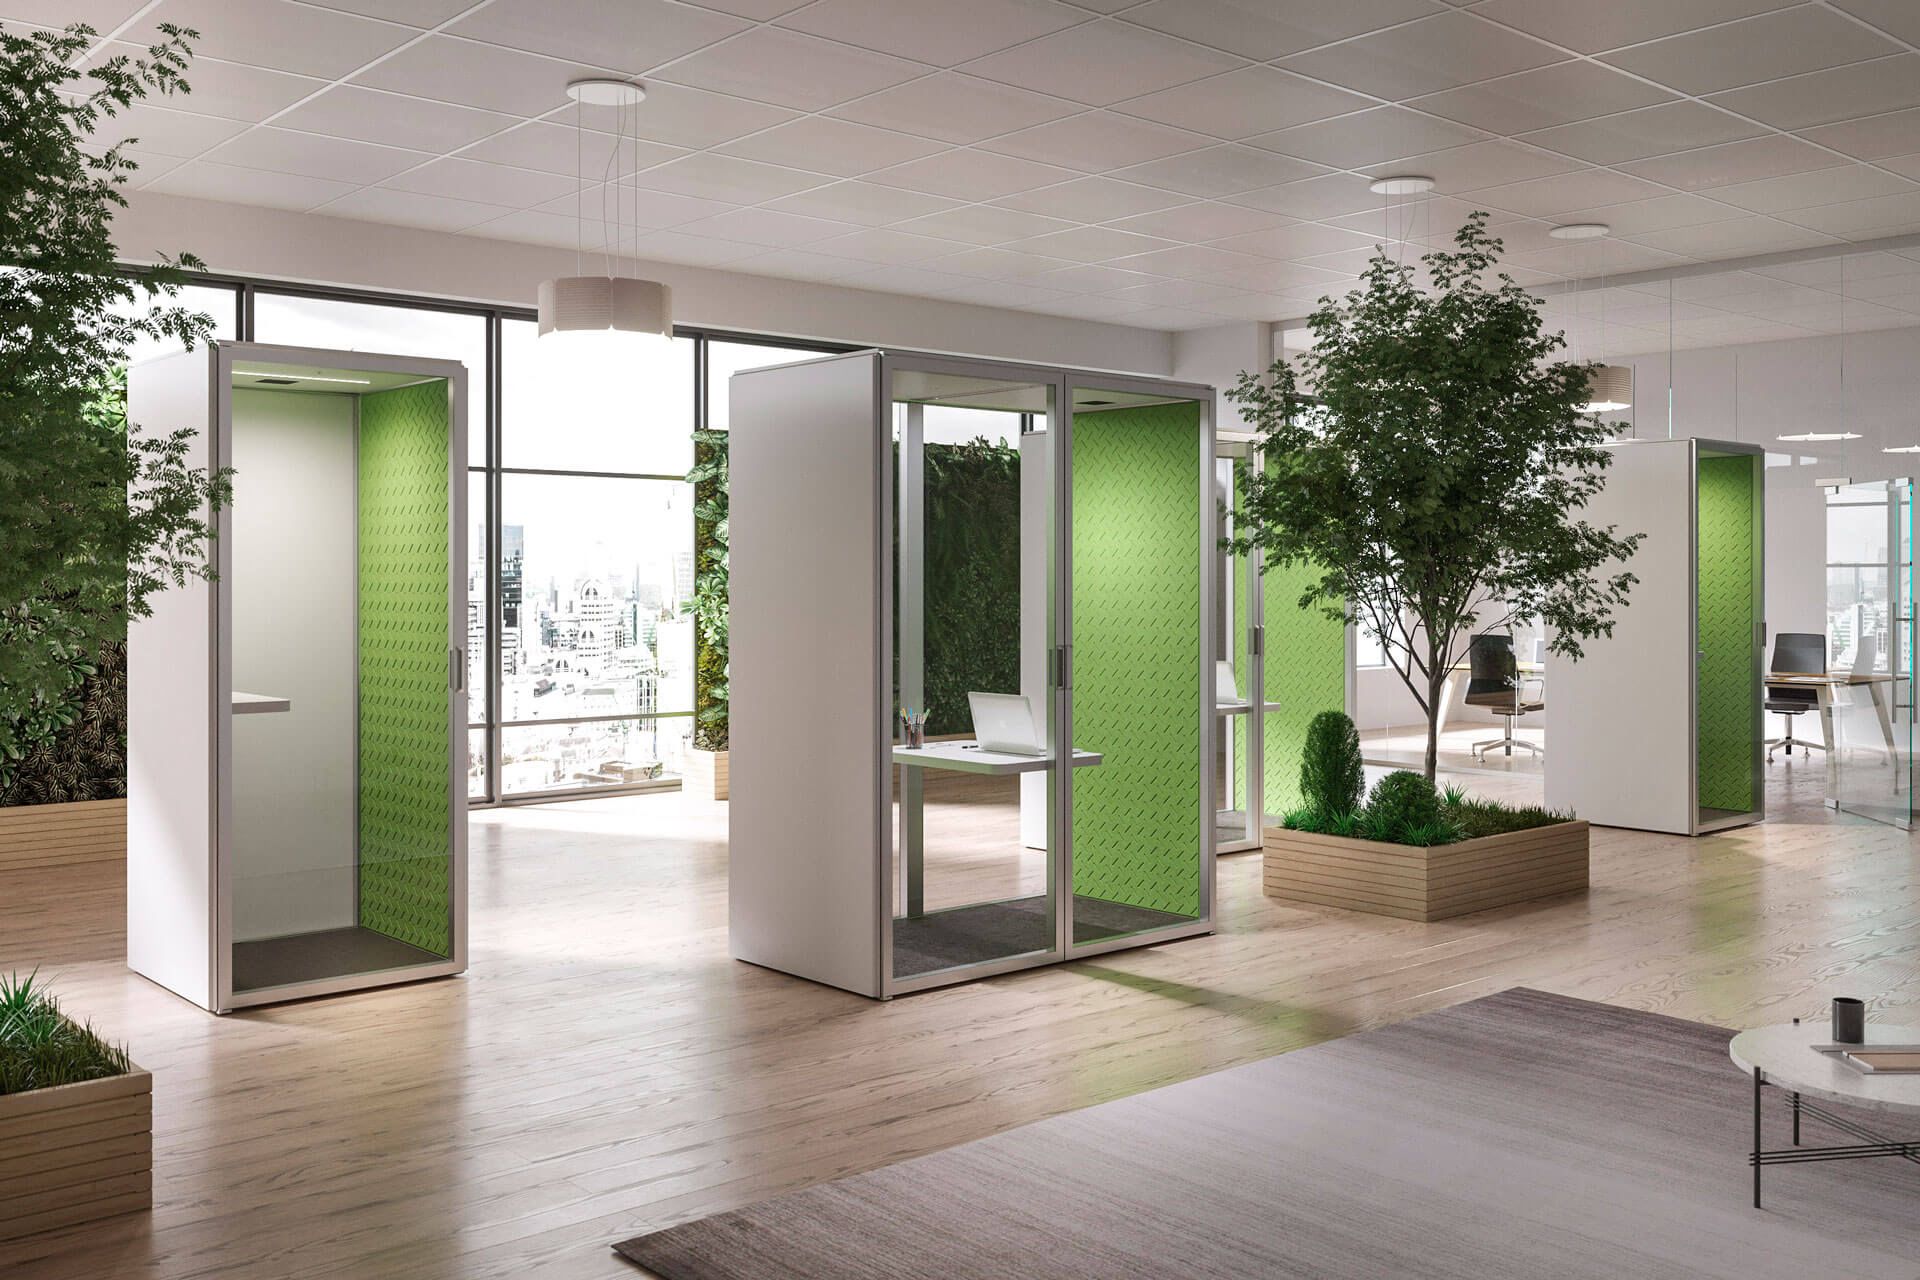 Smartbox, the acoustic pod for the office